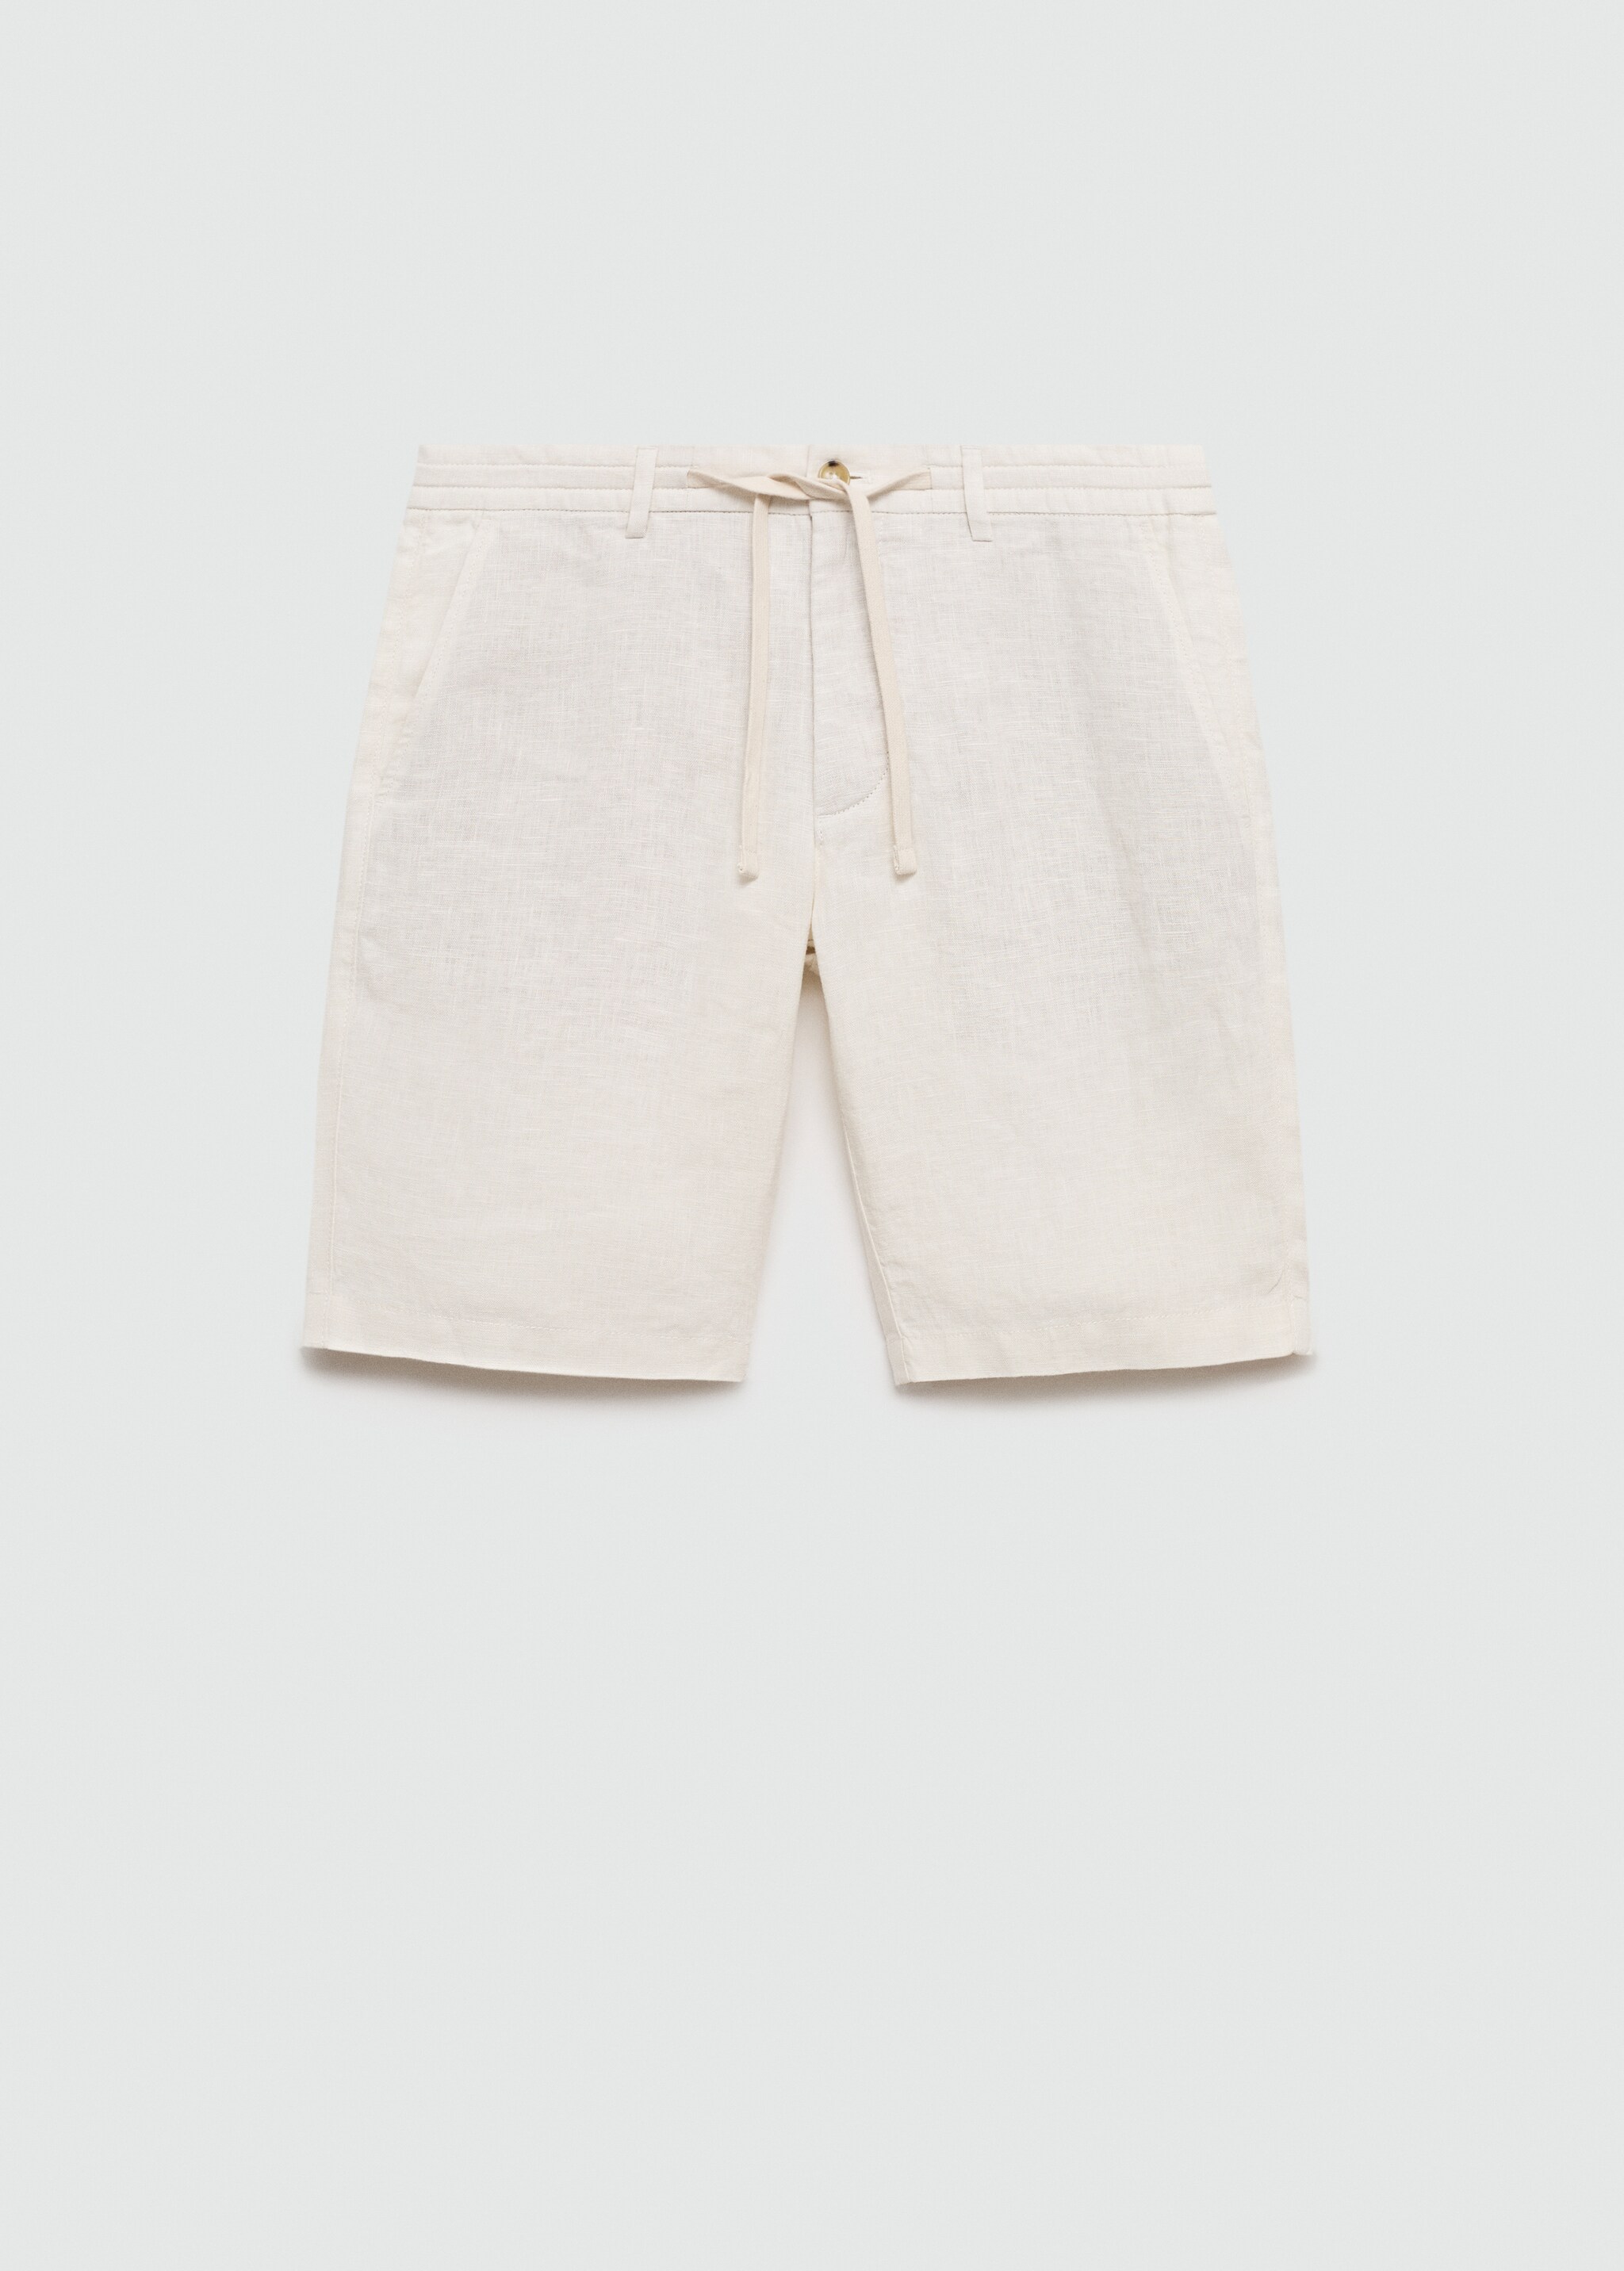 100% linen bermuda shorts with drawstring - Article without model